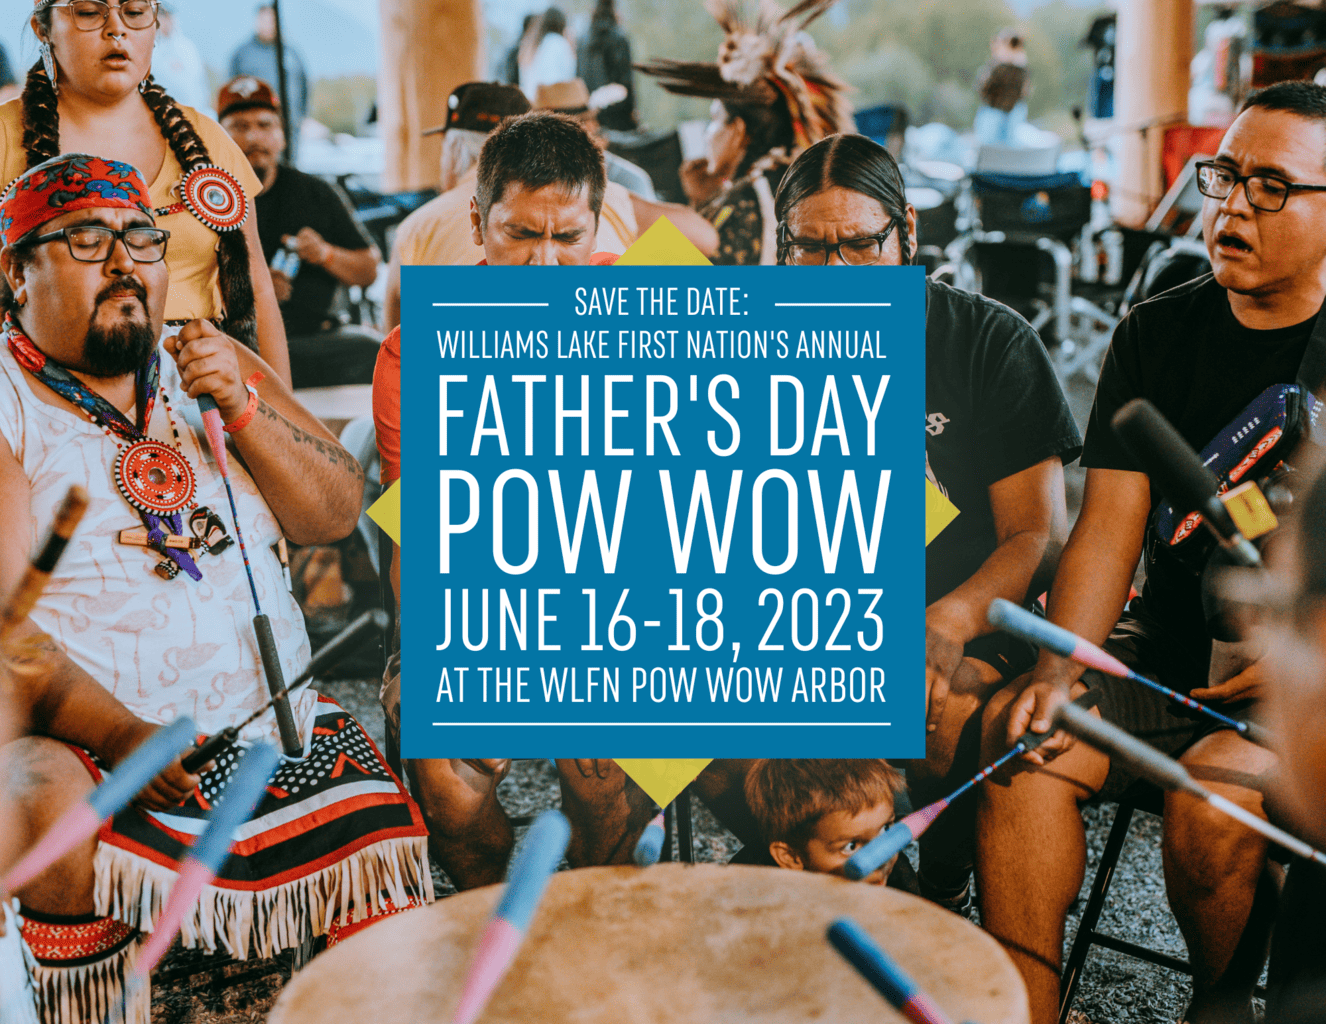 Williams Lake First Nation's Annual Father's Day Traditional Pow Wow 2023